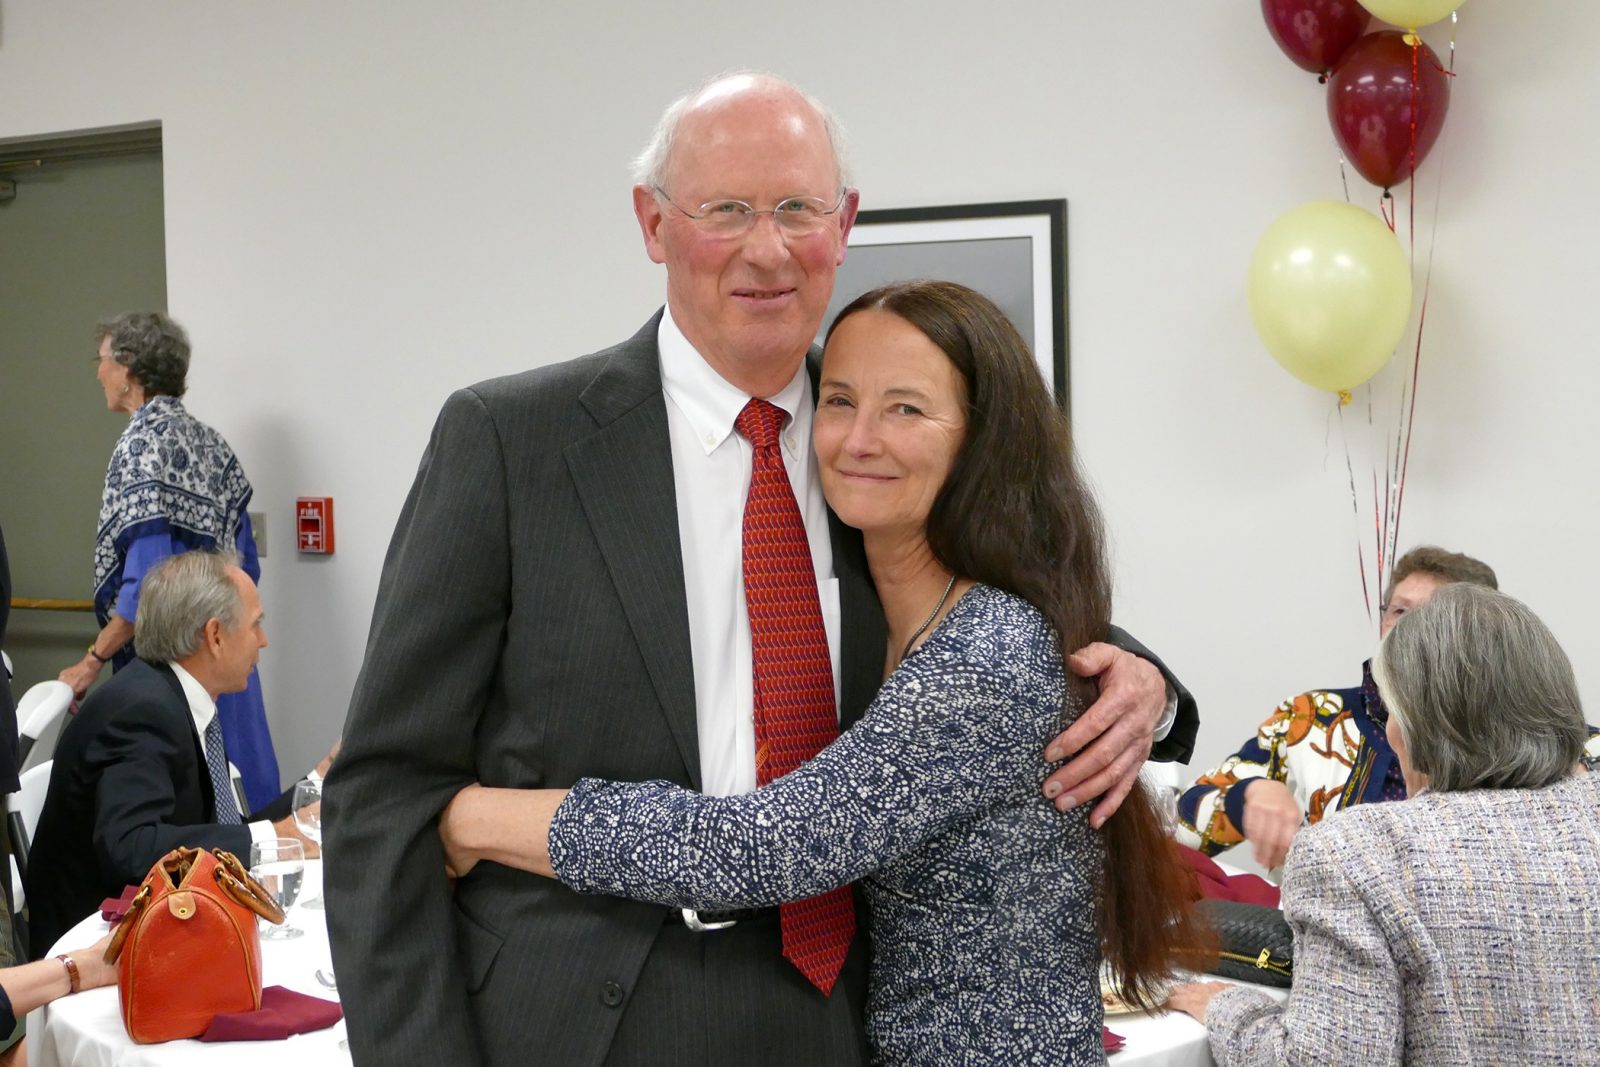 Dr. Nate White and his wife, Dr. Leslie Sinn